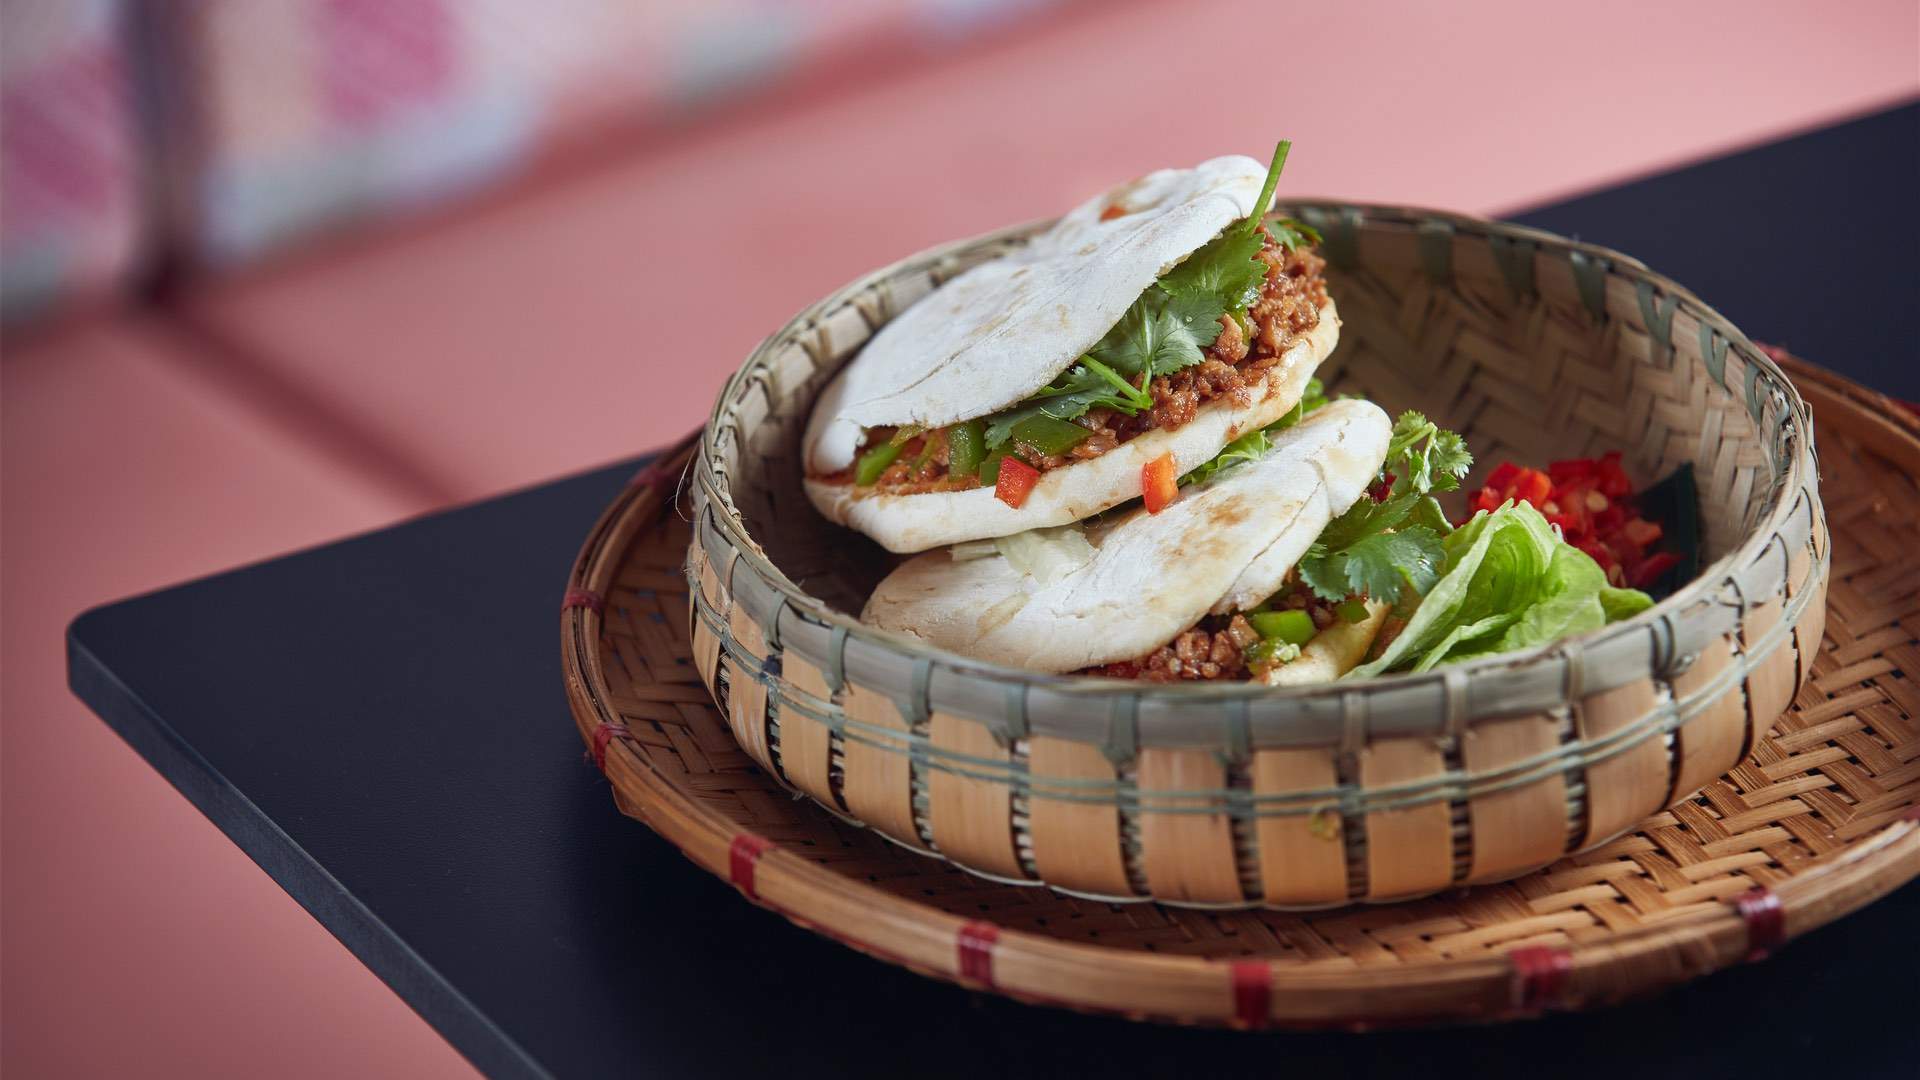 Hawthorn's New Chinese Eatery Naxi Folk Brings a Taste of Yunnan To Melbourne